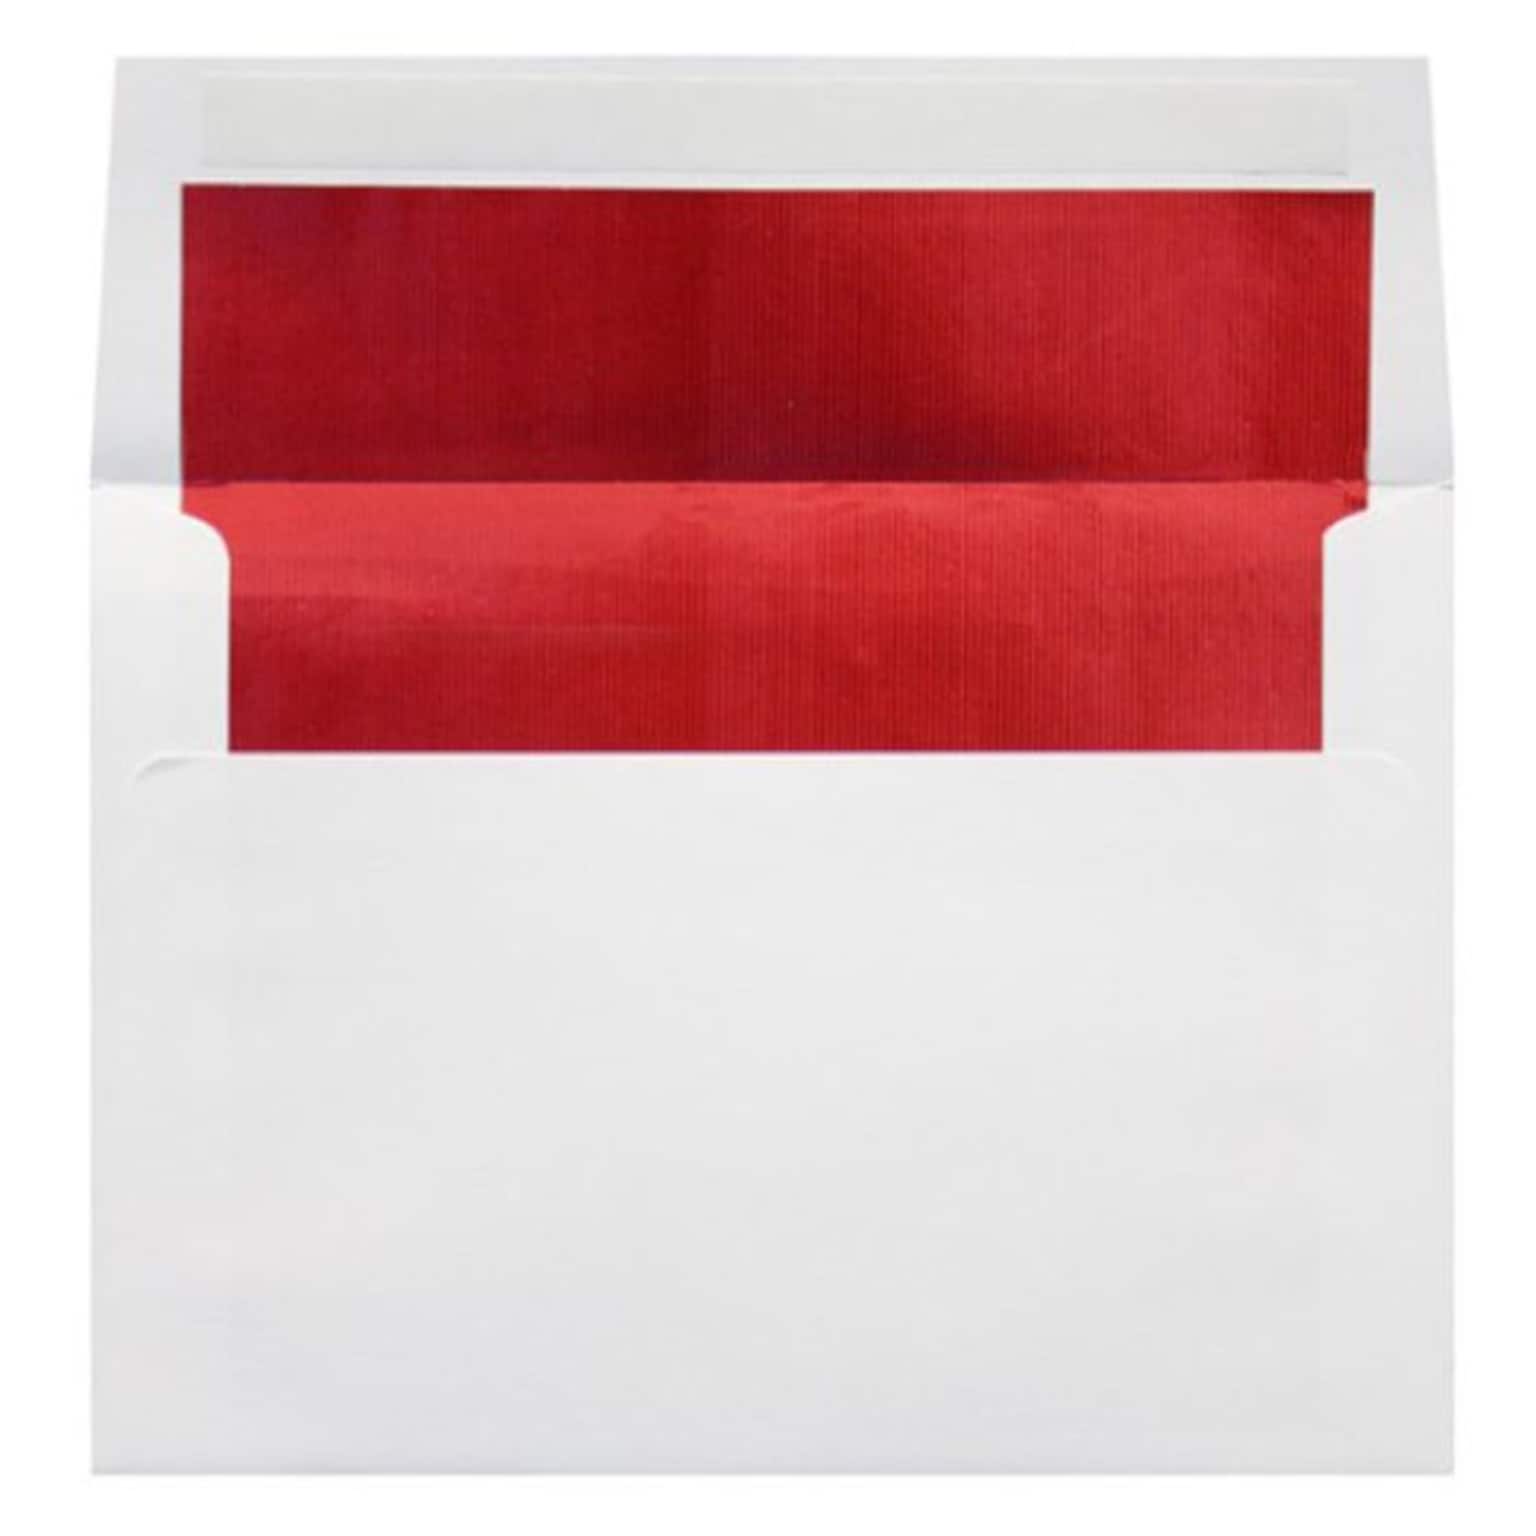 LUX A7 Foil Lined Invitation Envelopes (5 1/4 x 7 1/4) 50/Box, White w/Red LUX Lining (FLWH4880-01-50)